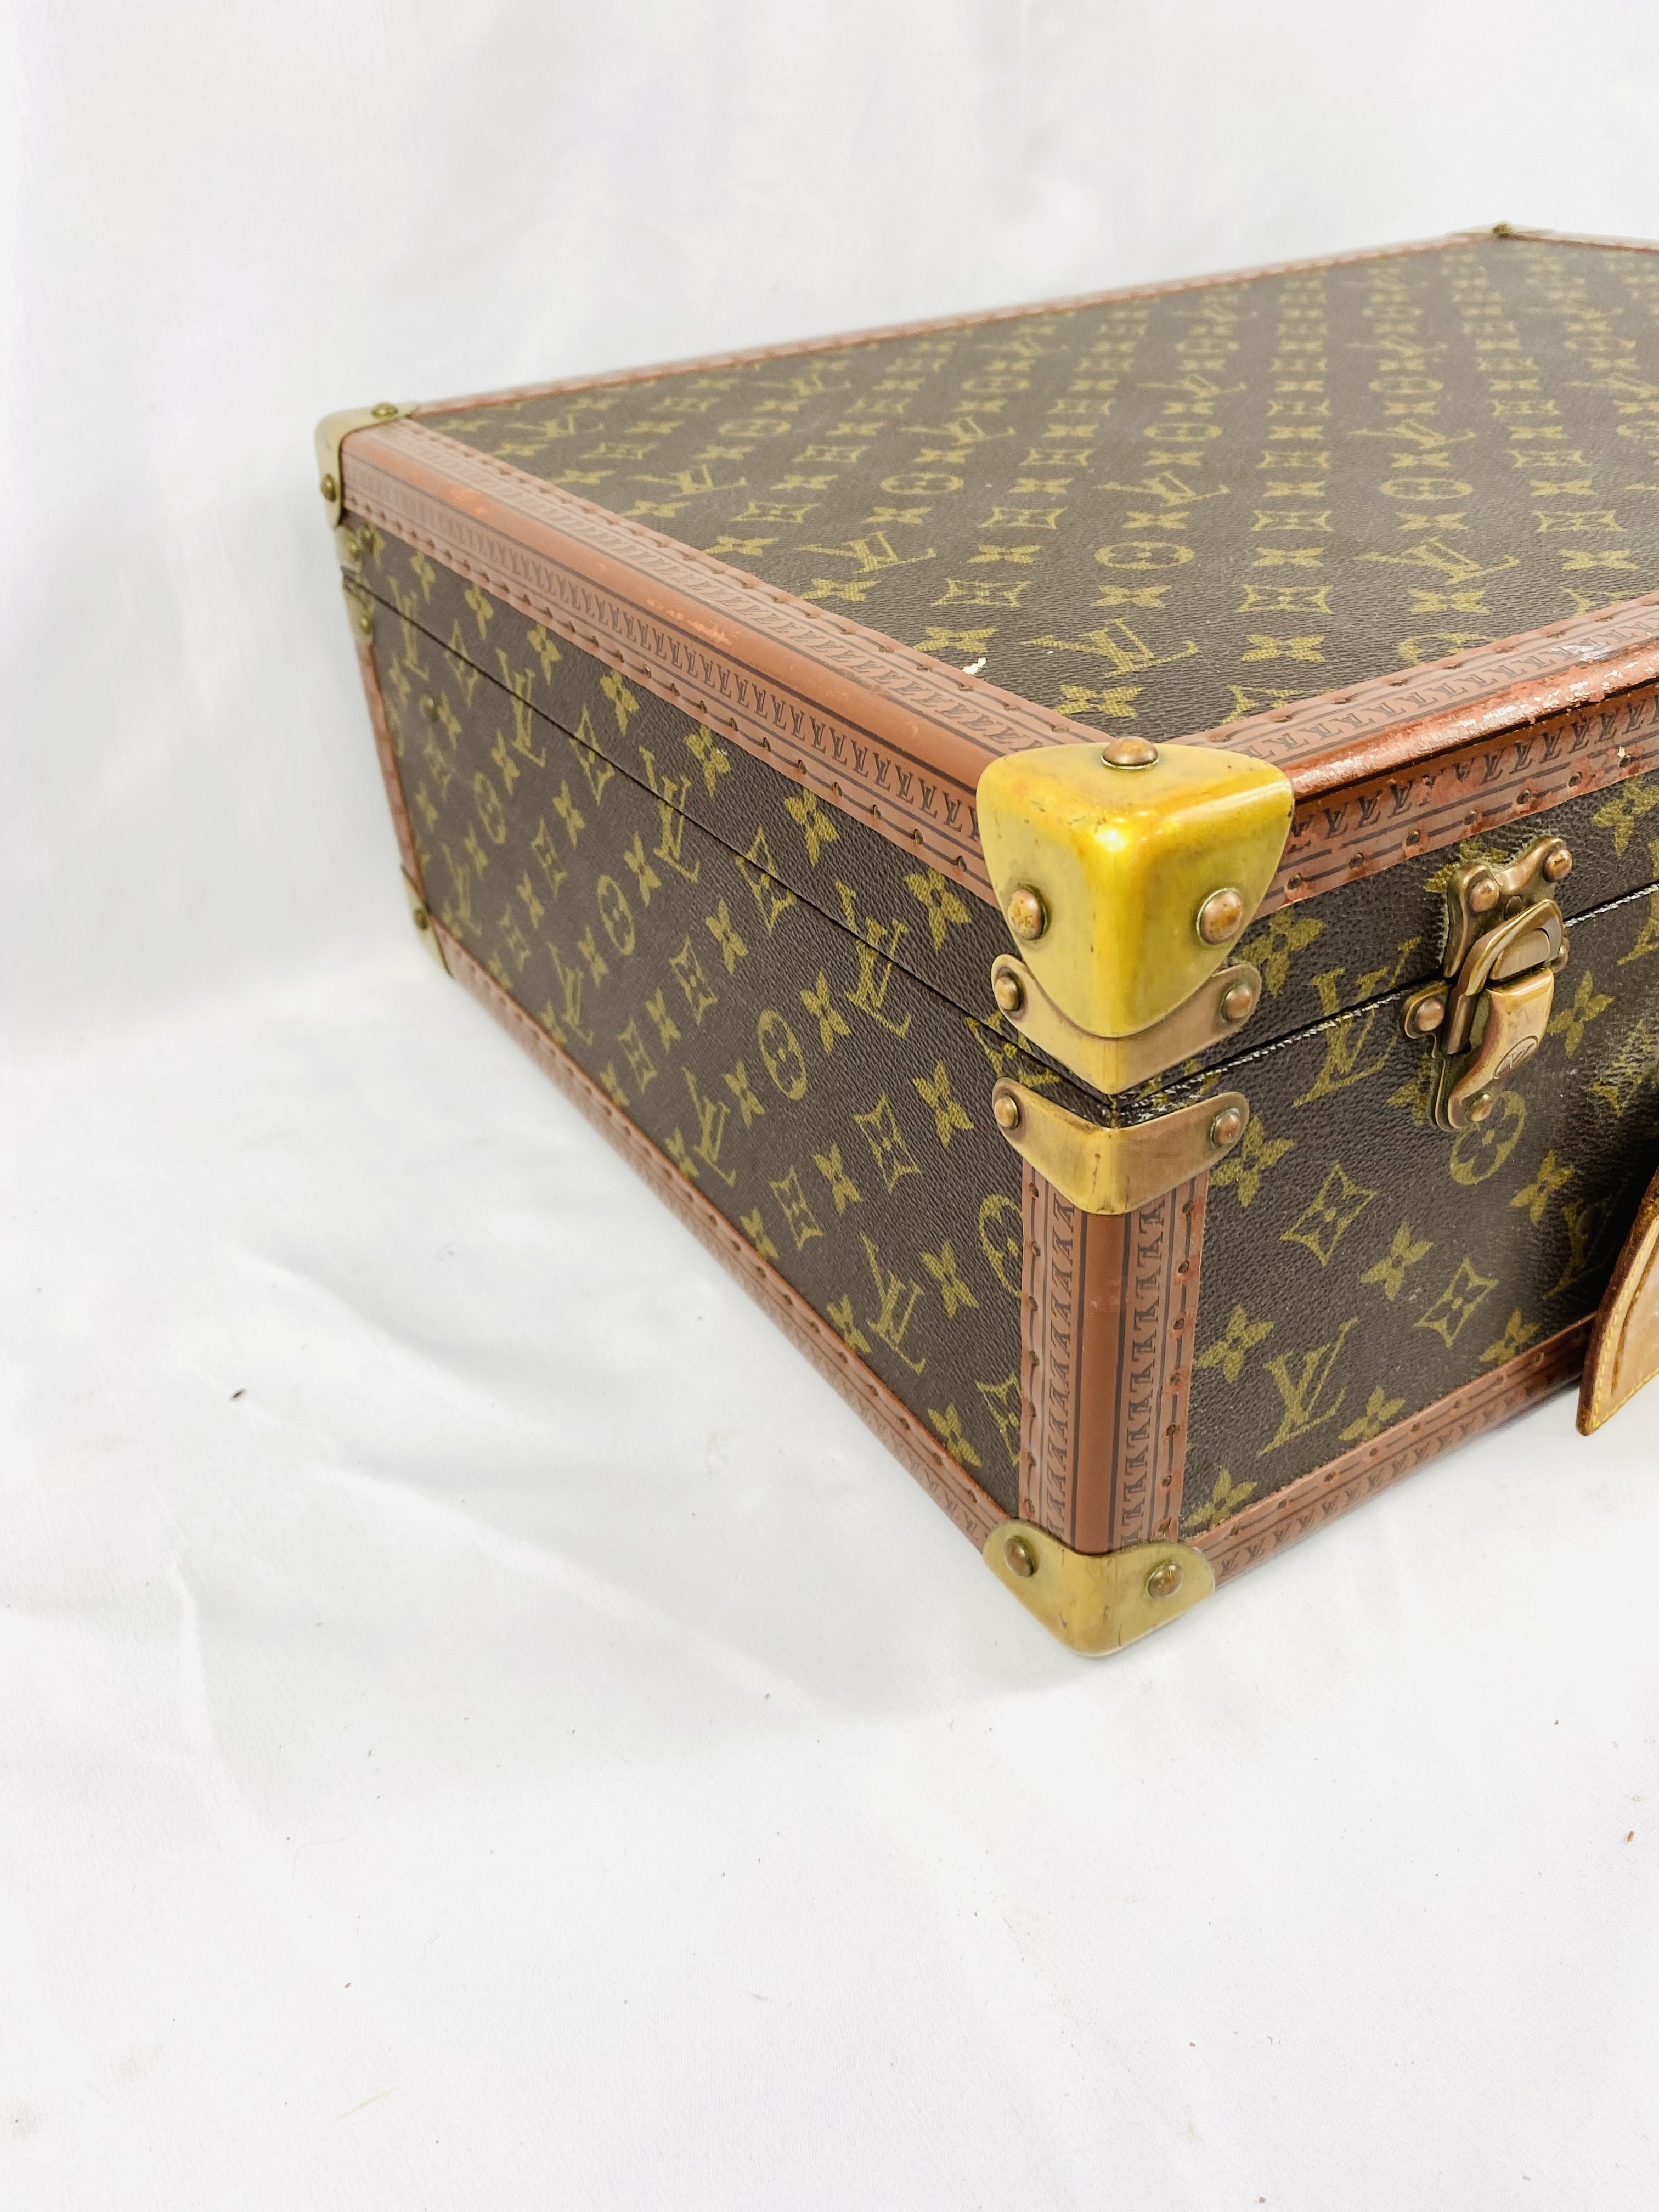 Louis Vuitton suitcase with protective cover - Image 3 of 10